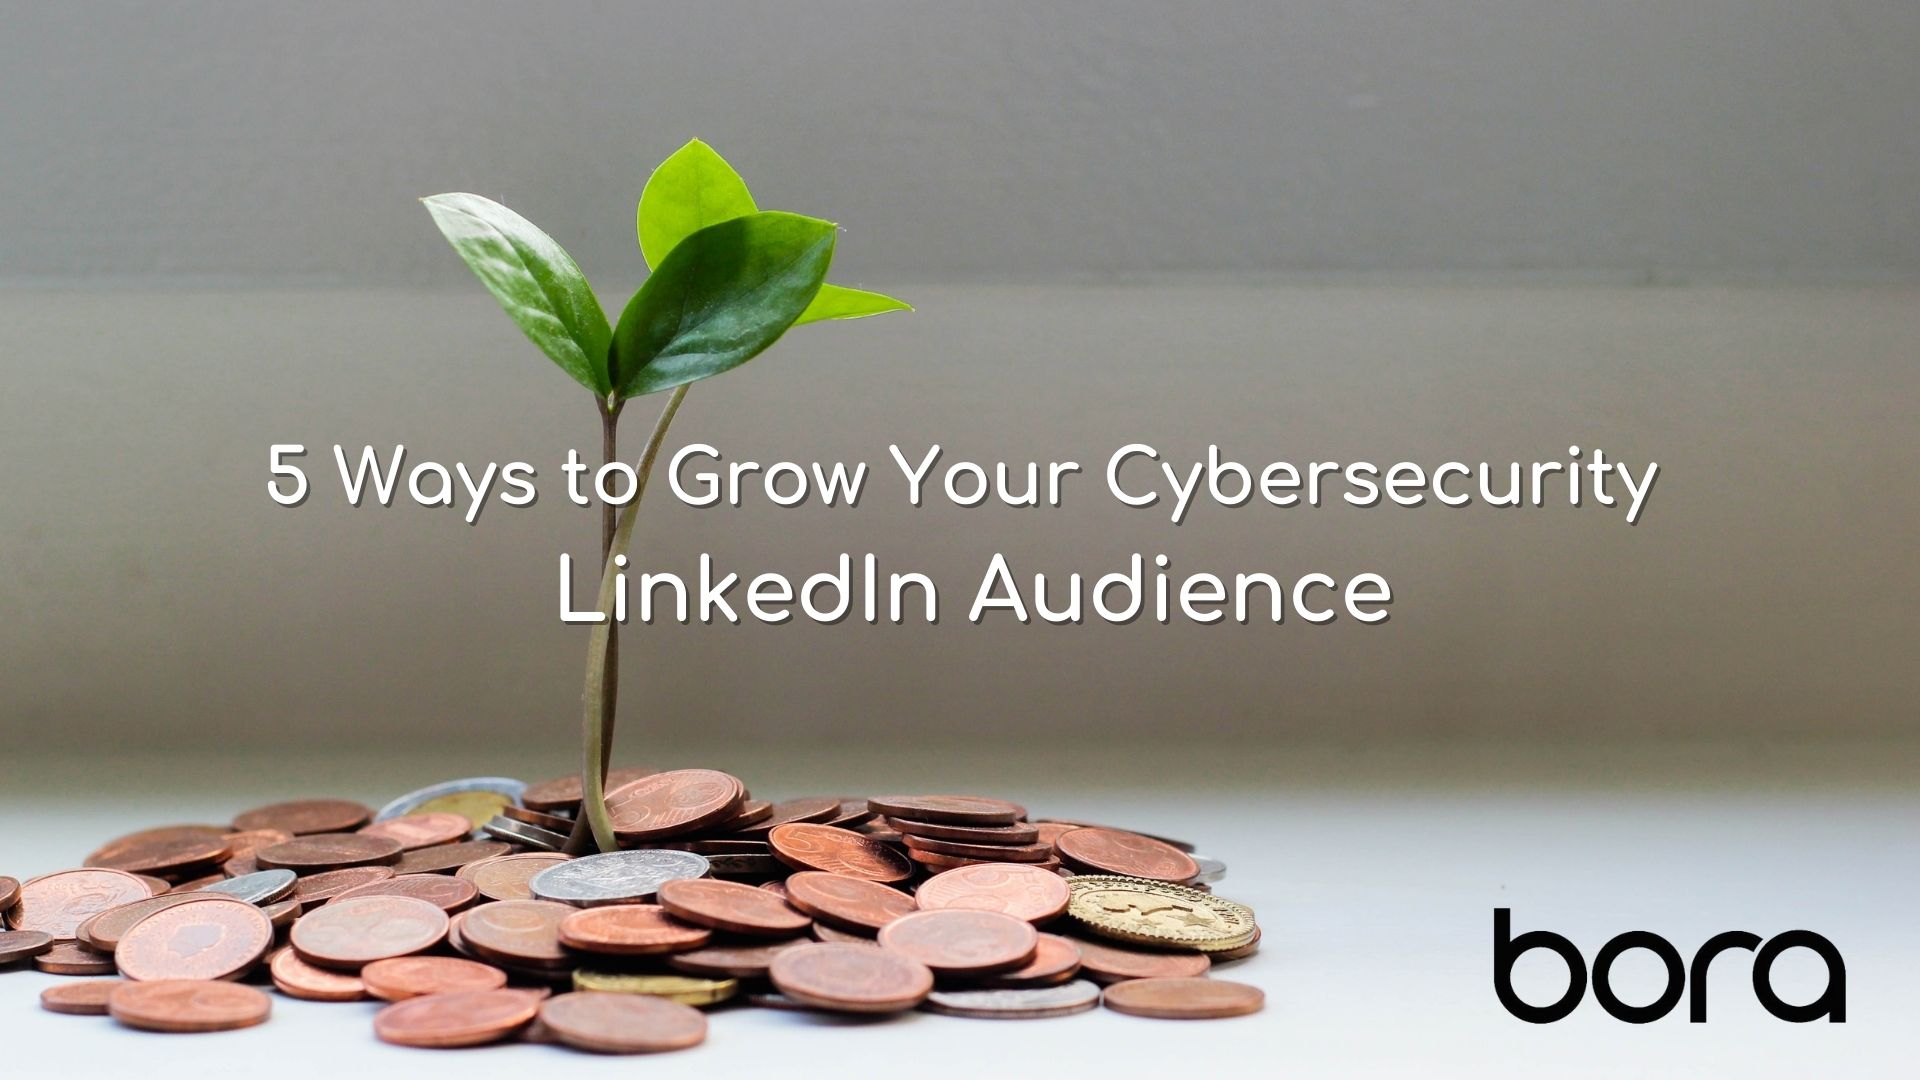 5 Ways to Grow Your Cybersecurity LinkedIn Audience